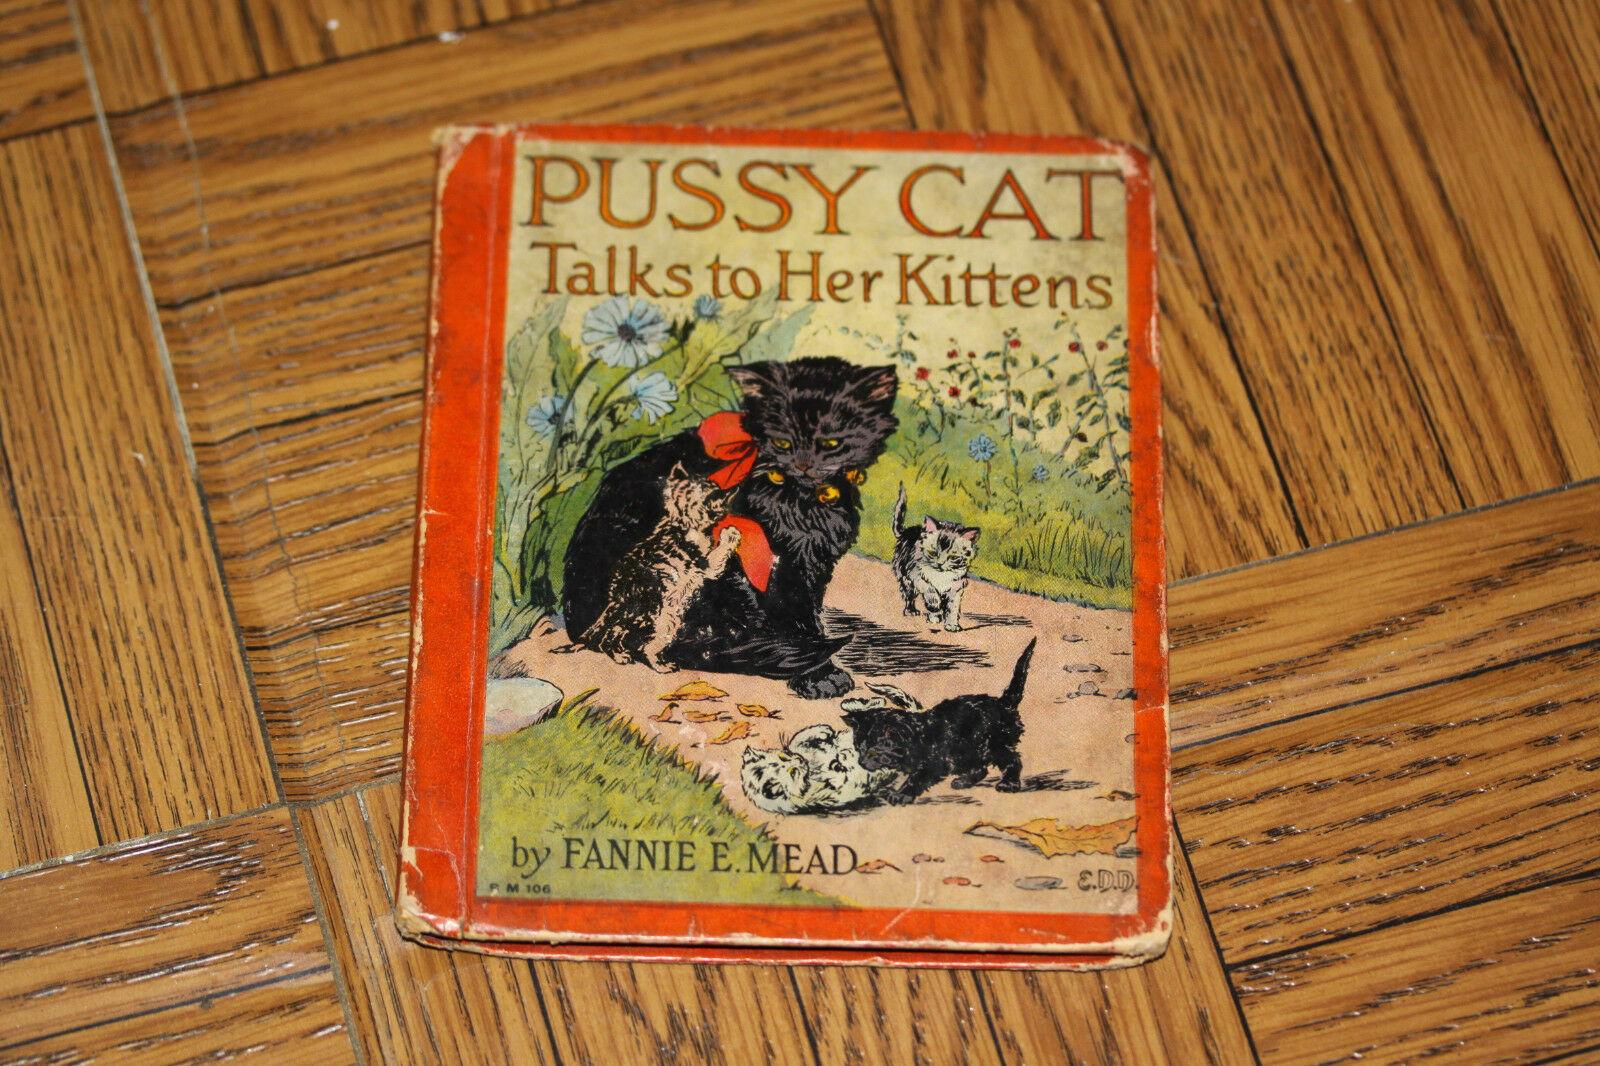 1934 Pussy Cat Talks To Her Kittens By Fannie E Mead Vintage Children's Book